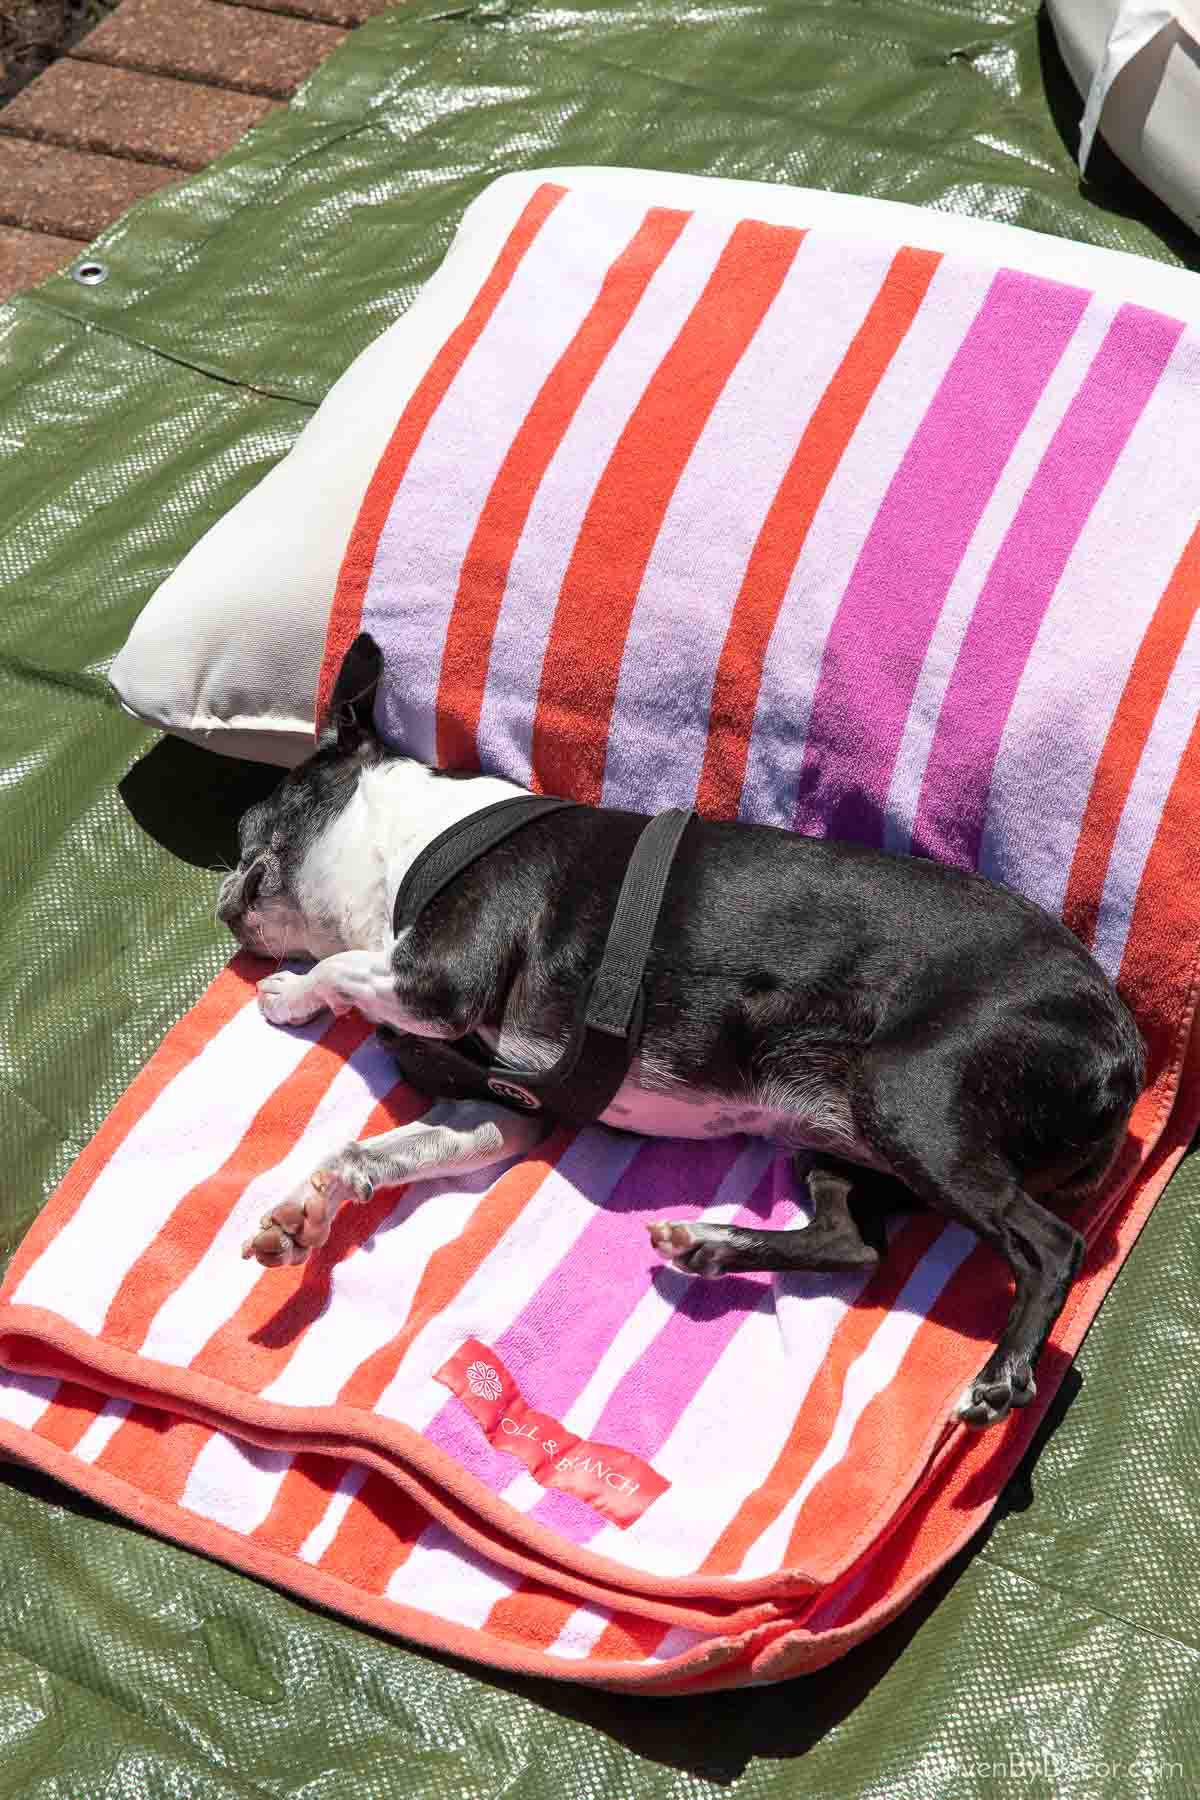 Dog lying on towel used to dry outdoor cushions